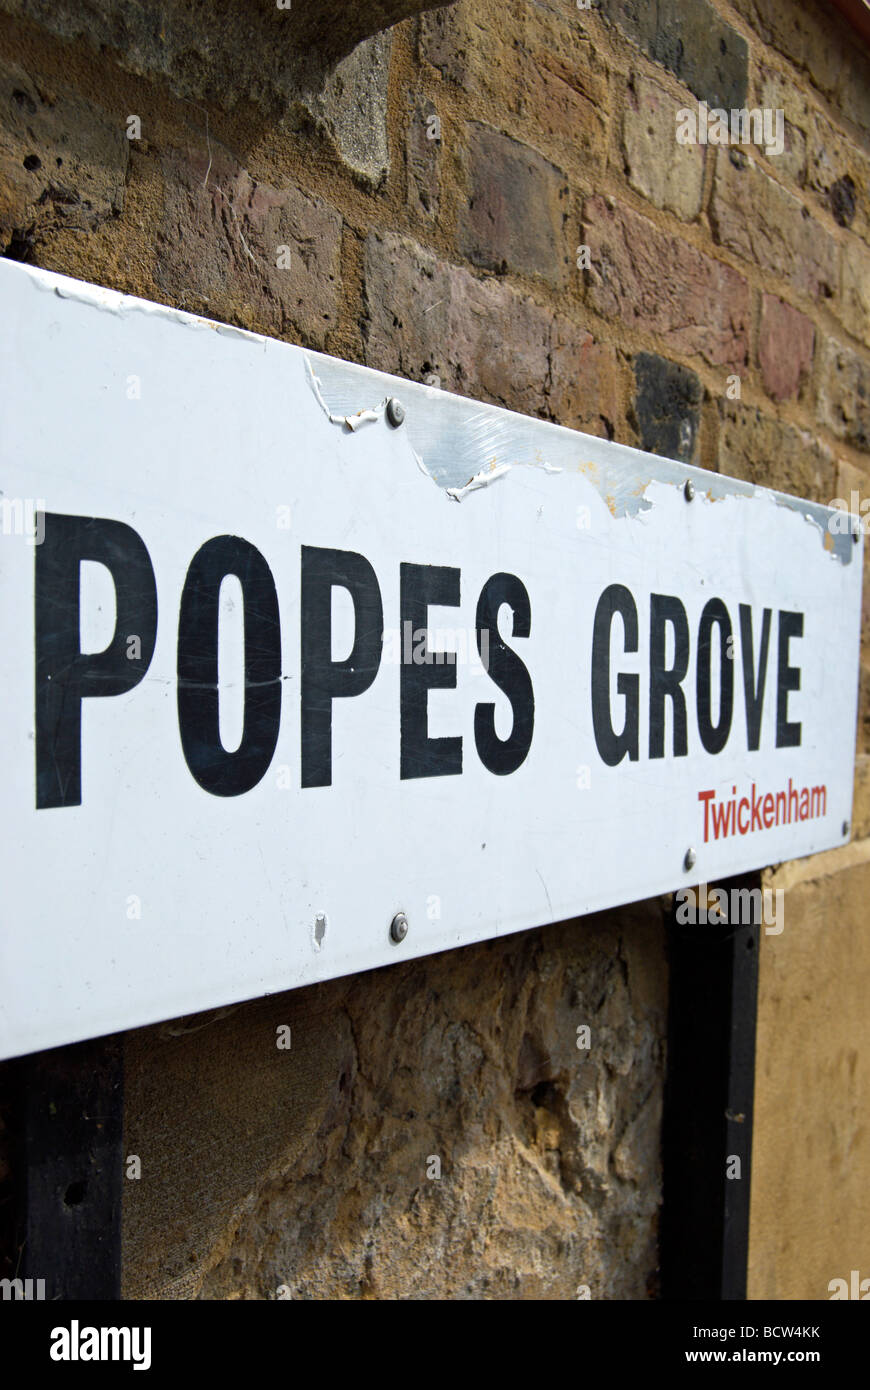 street sign for popes grove,  named after the 18th century writer alexander pope, in twickenham, middlesex, england Stock Photo